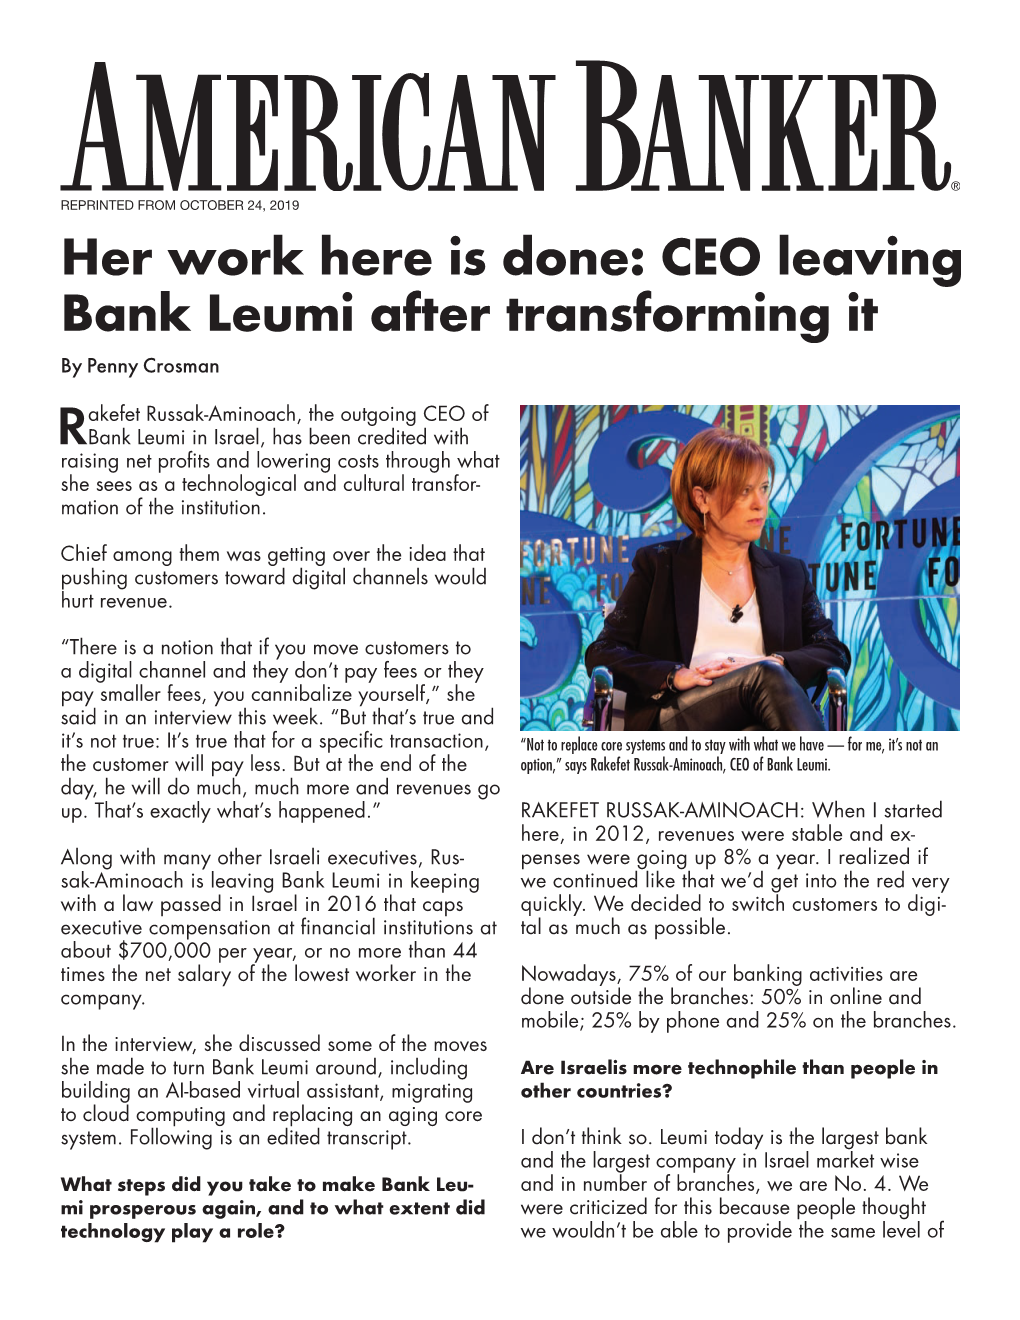 CEO Leaving Bank Leumi After Transforming It by Penny Crosman